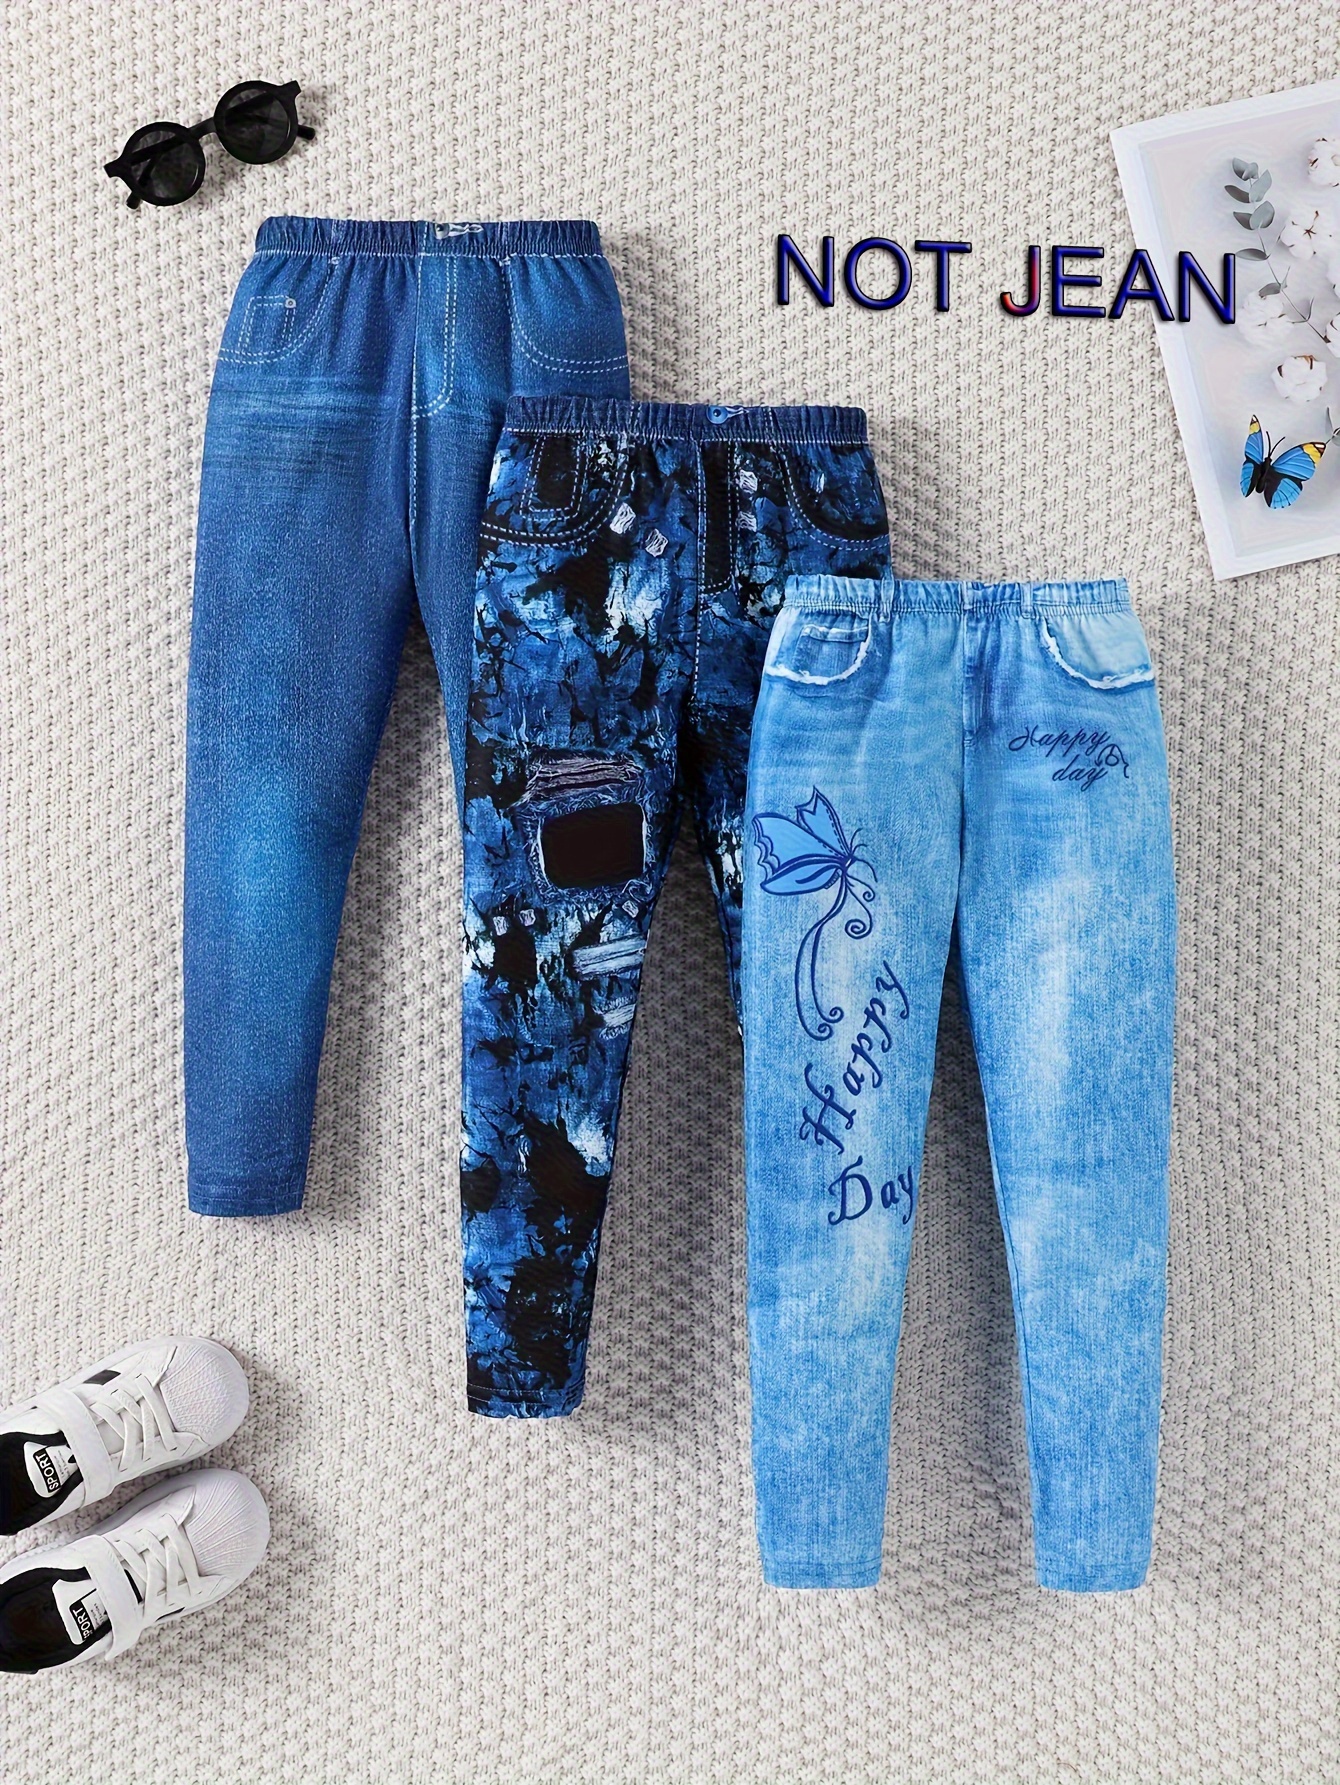 Jeans, pants and leggings for teenage girls